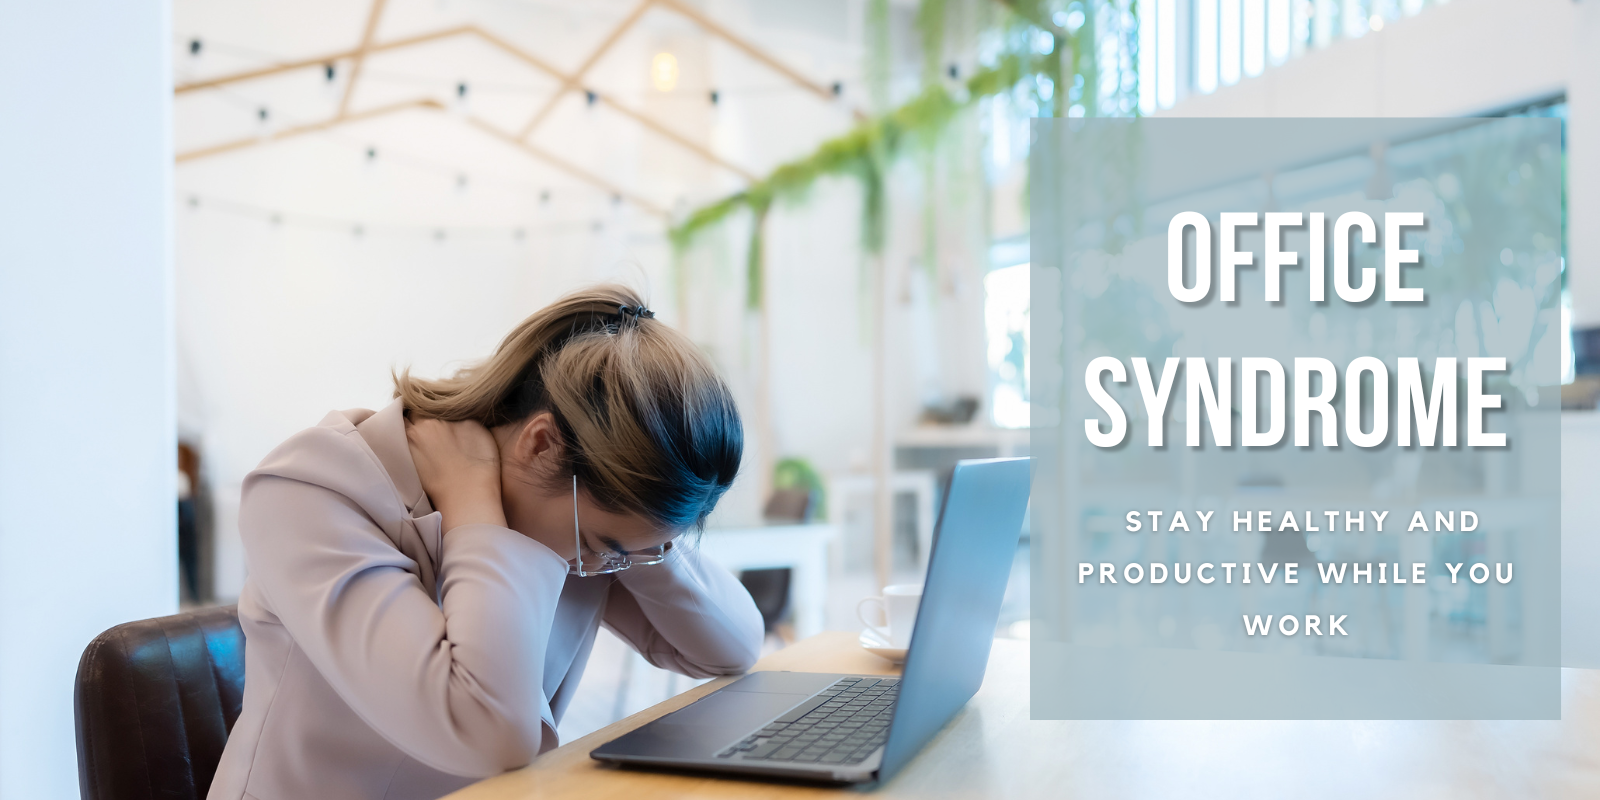 Office Syndrome - Stay Healthy and Productive While You Work